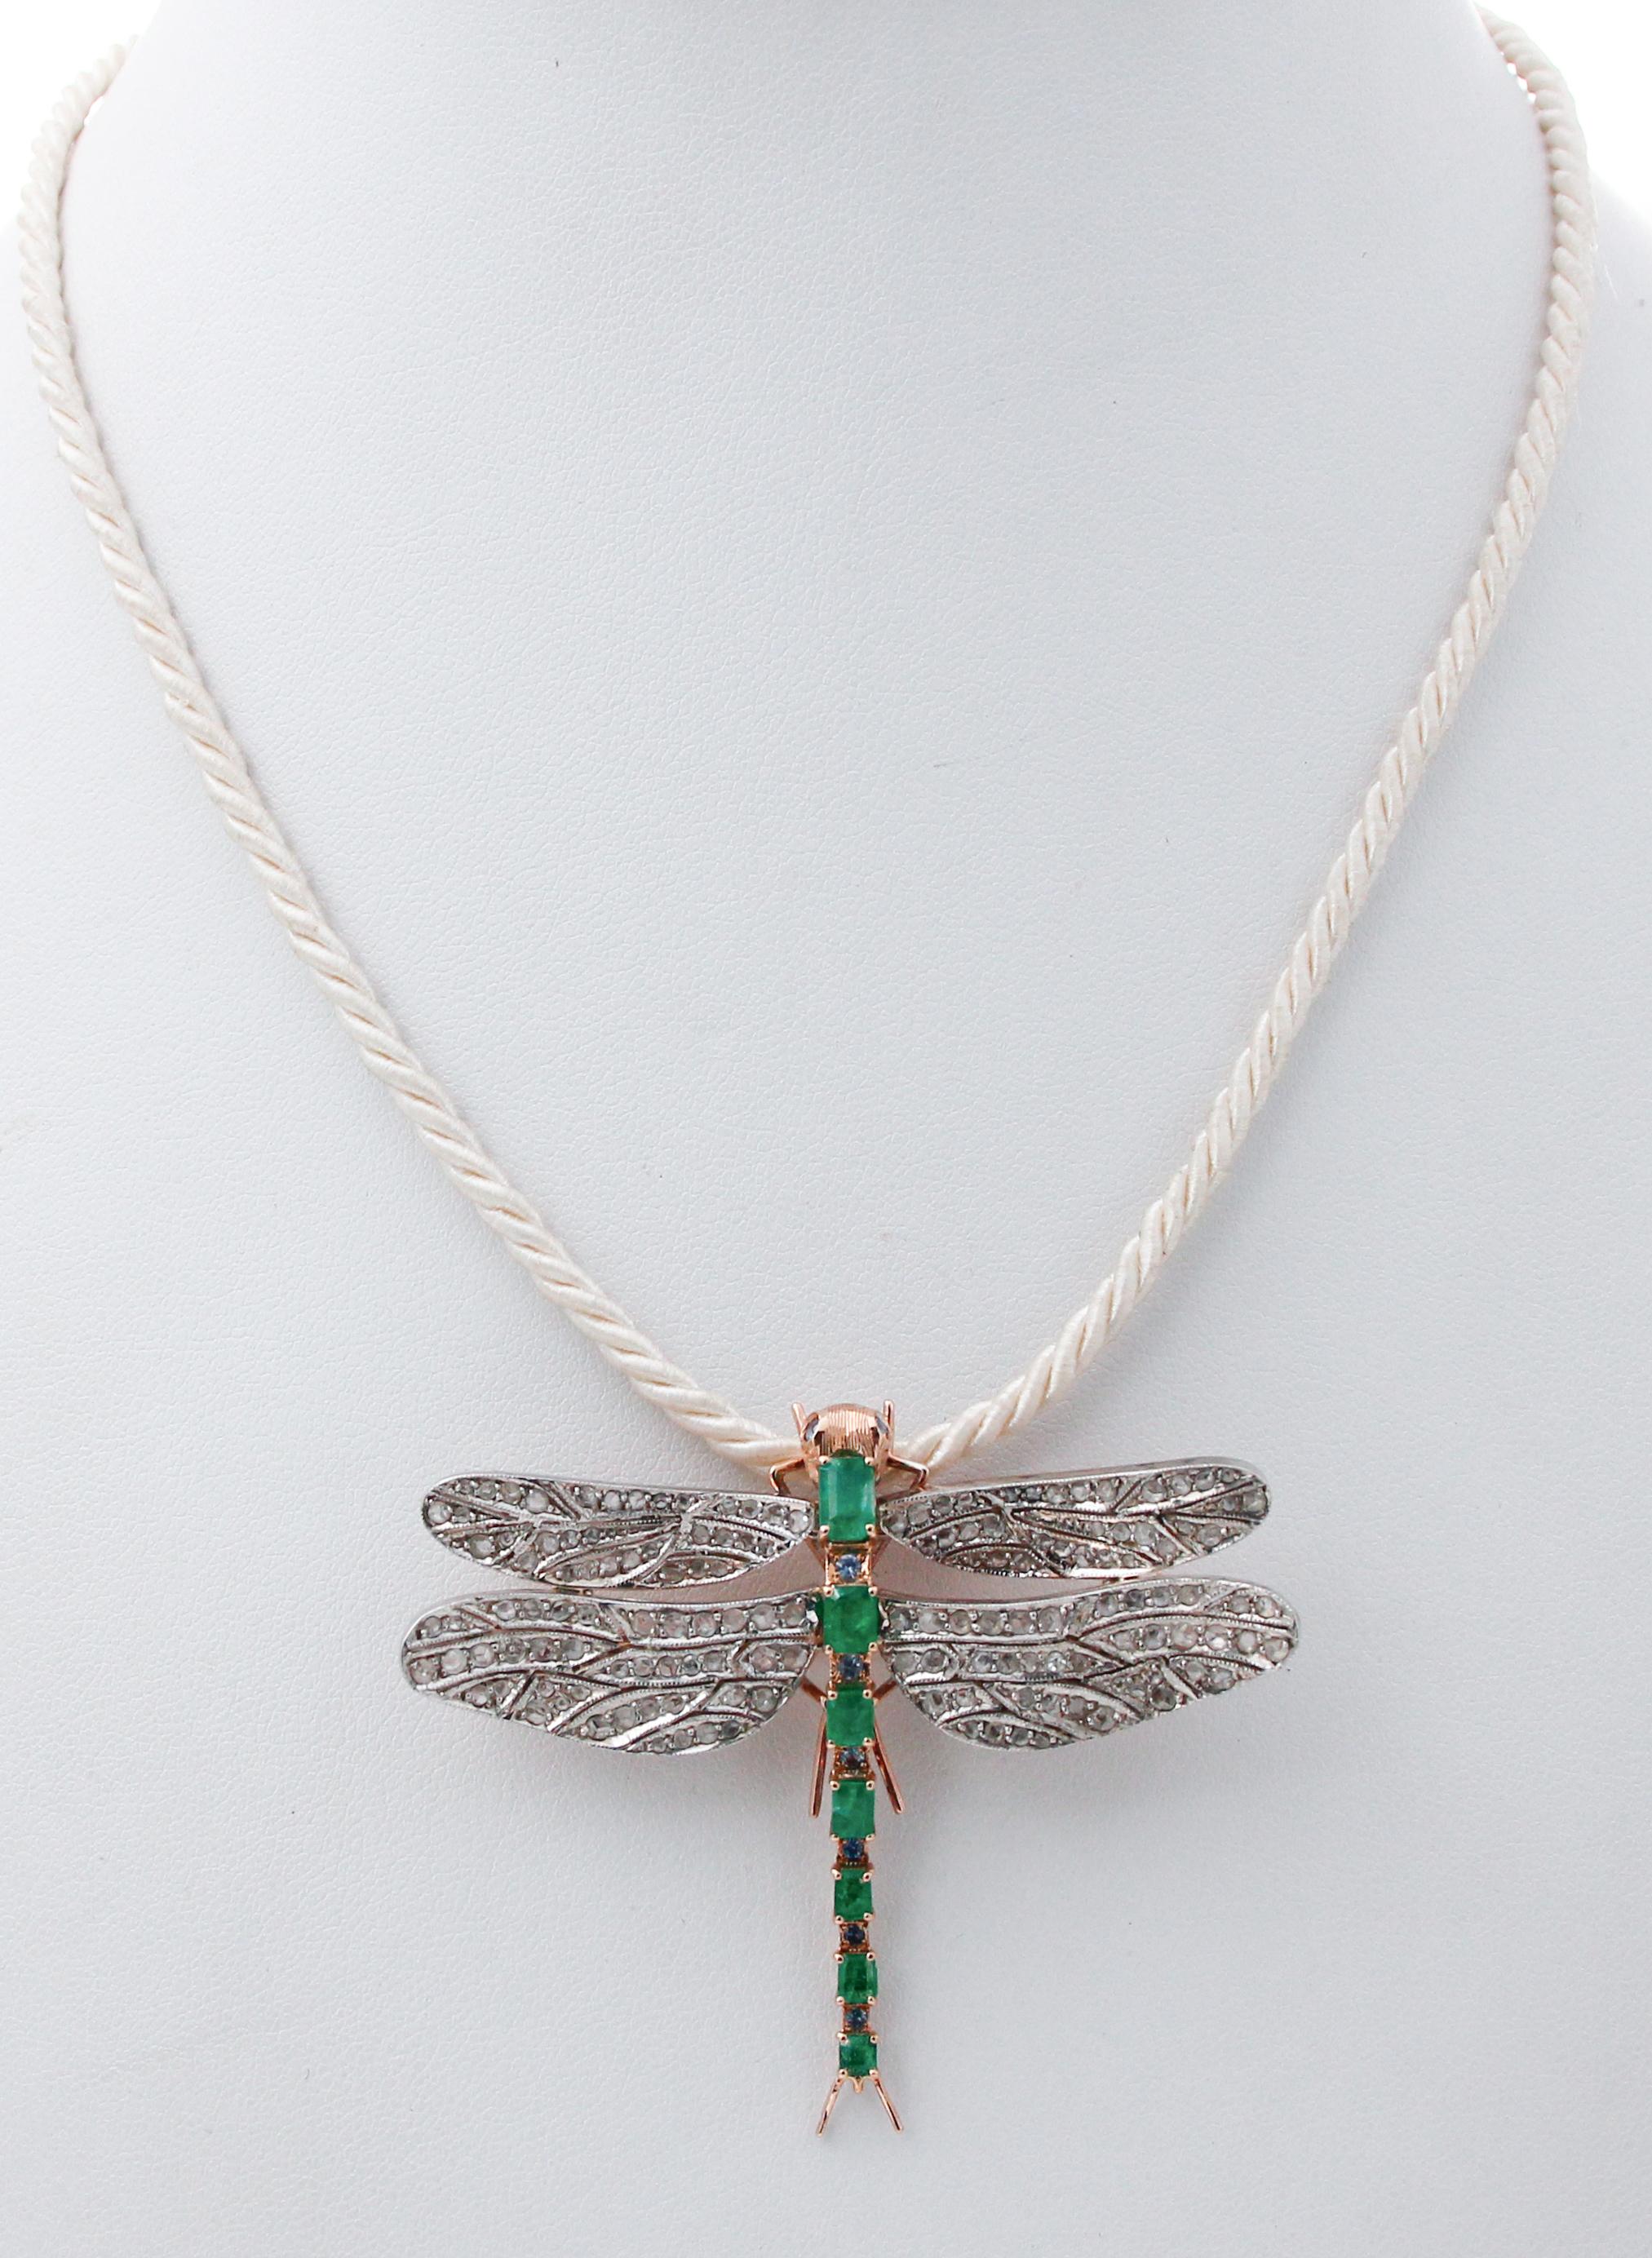 Beautiful pendant/brooch shaped dragonfly studded with emeralds and sapphires on the body; two sapphires as eyes and the wings are studded with diamonds.
This pendant/brooch is totally handmade by Italian master goldsmiths.
Diamonds 1.35 ct
Emeralds